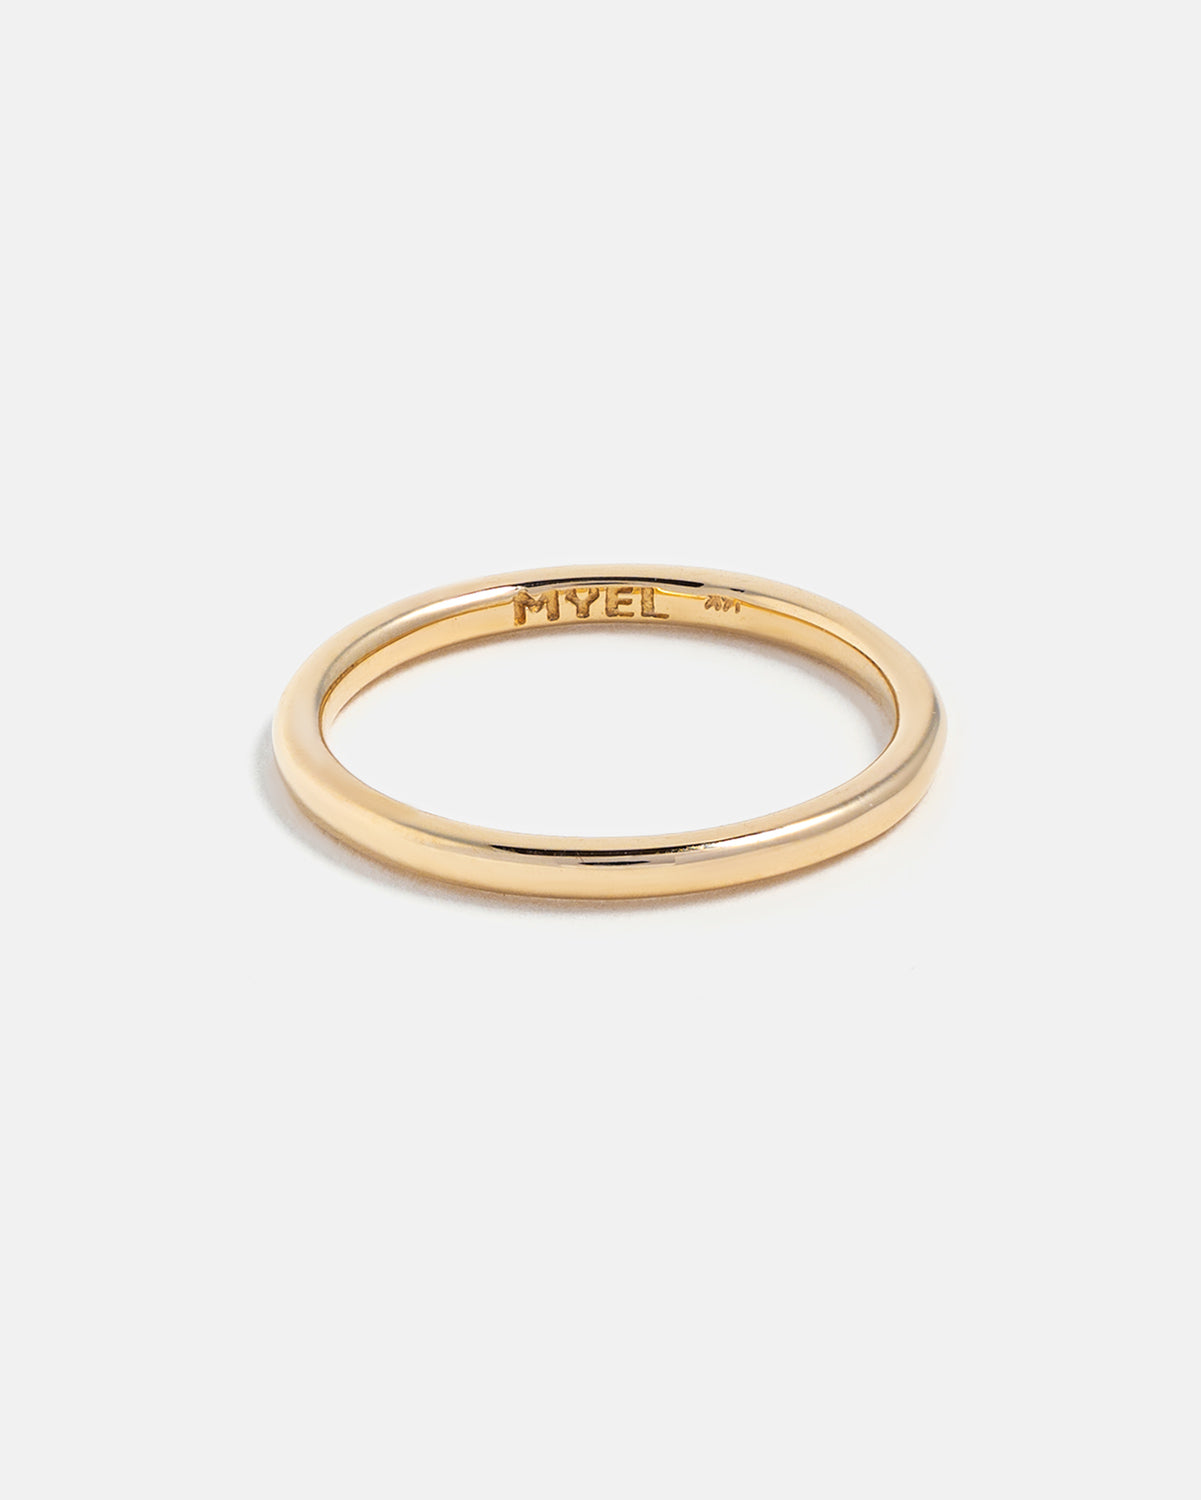 Stratura Wedding Ring in 14k Gold without stone